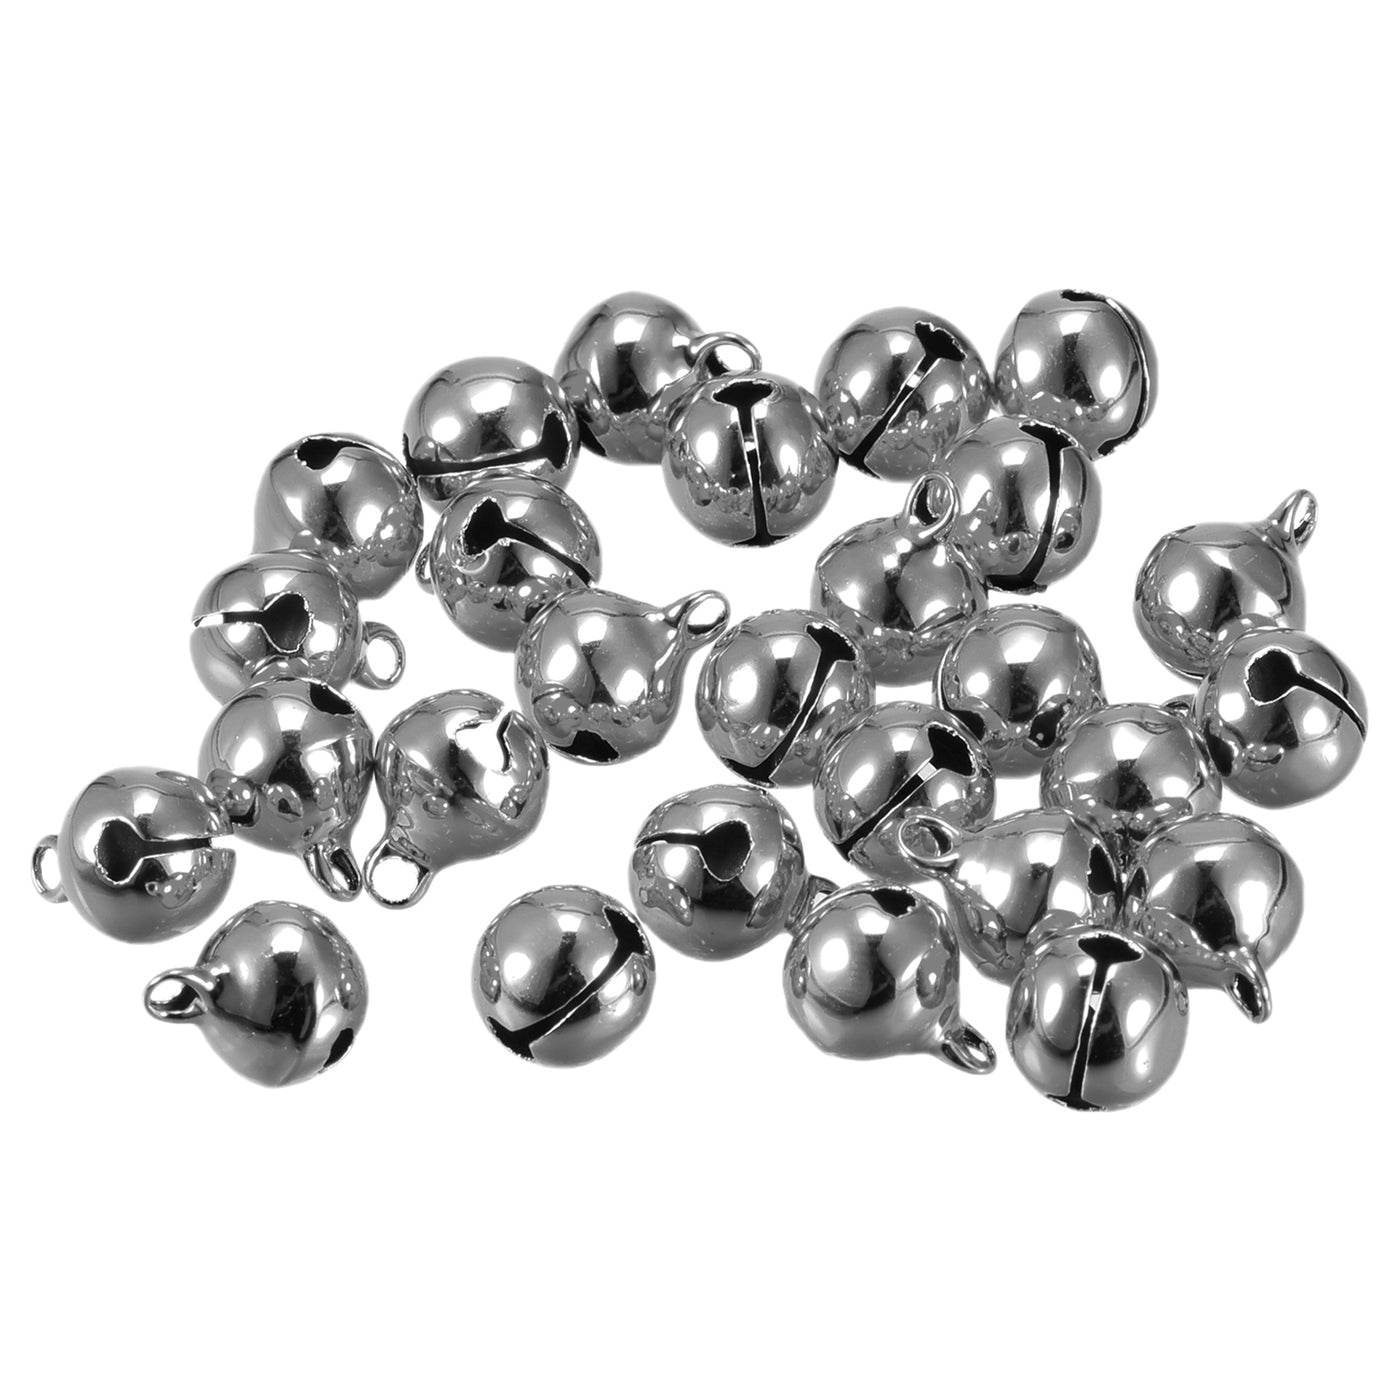 Uxcell Uxcell Jingle Bells, 10mm 48pcs Small Bells for Craft DIY Christmas, Silver Tone